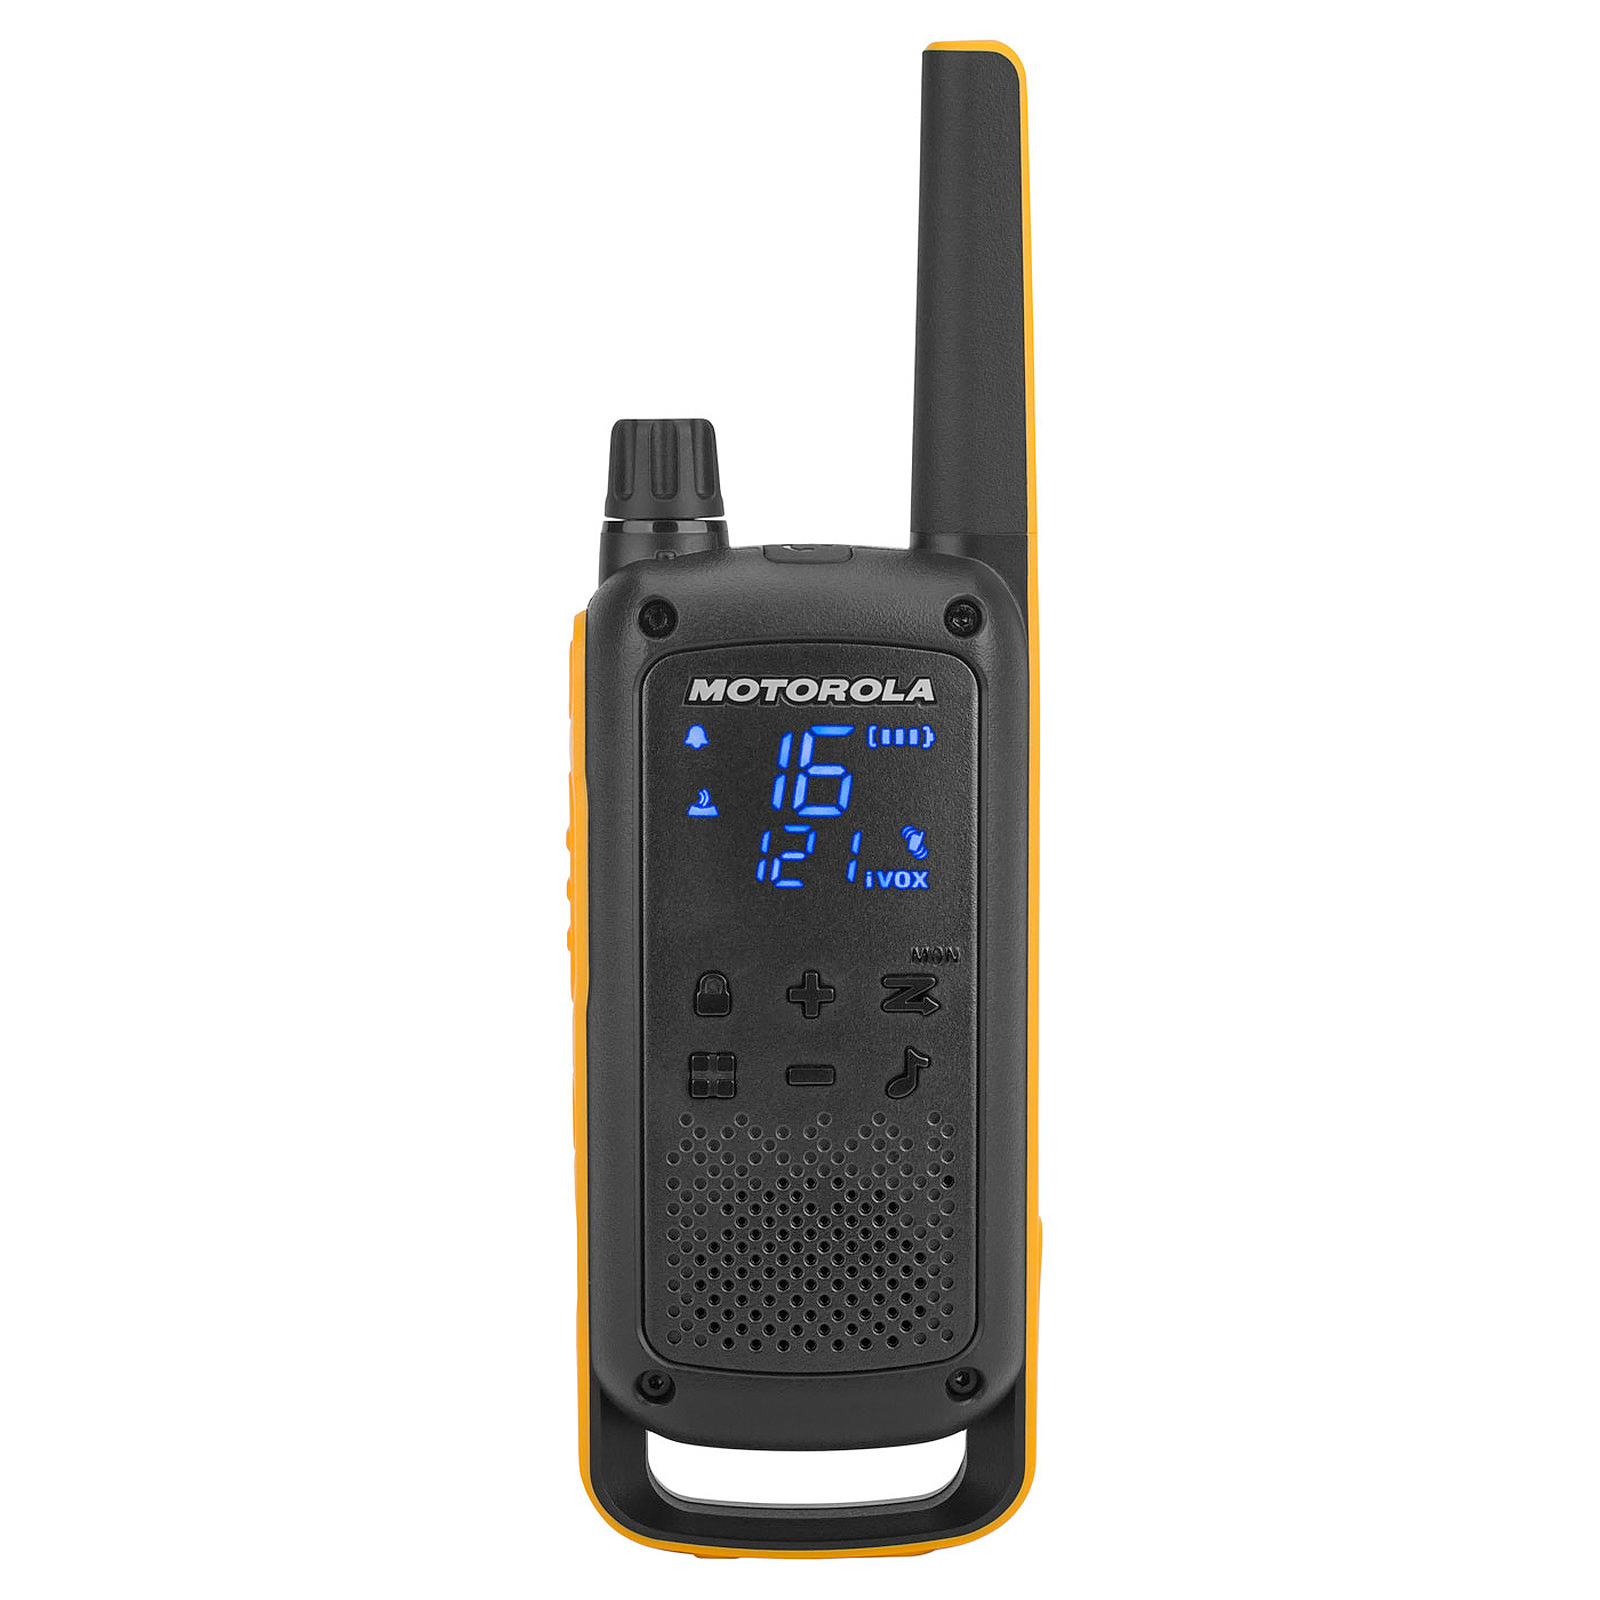 Telestar System Telecommunications Rome (Italy) TALKABOUT - PMR446 frequencies Consumer Walkie Talkies T82 EXTREME